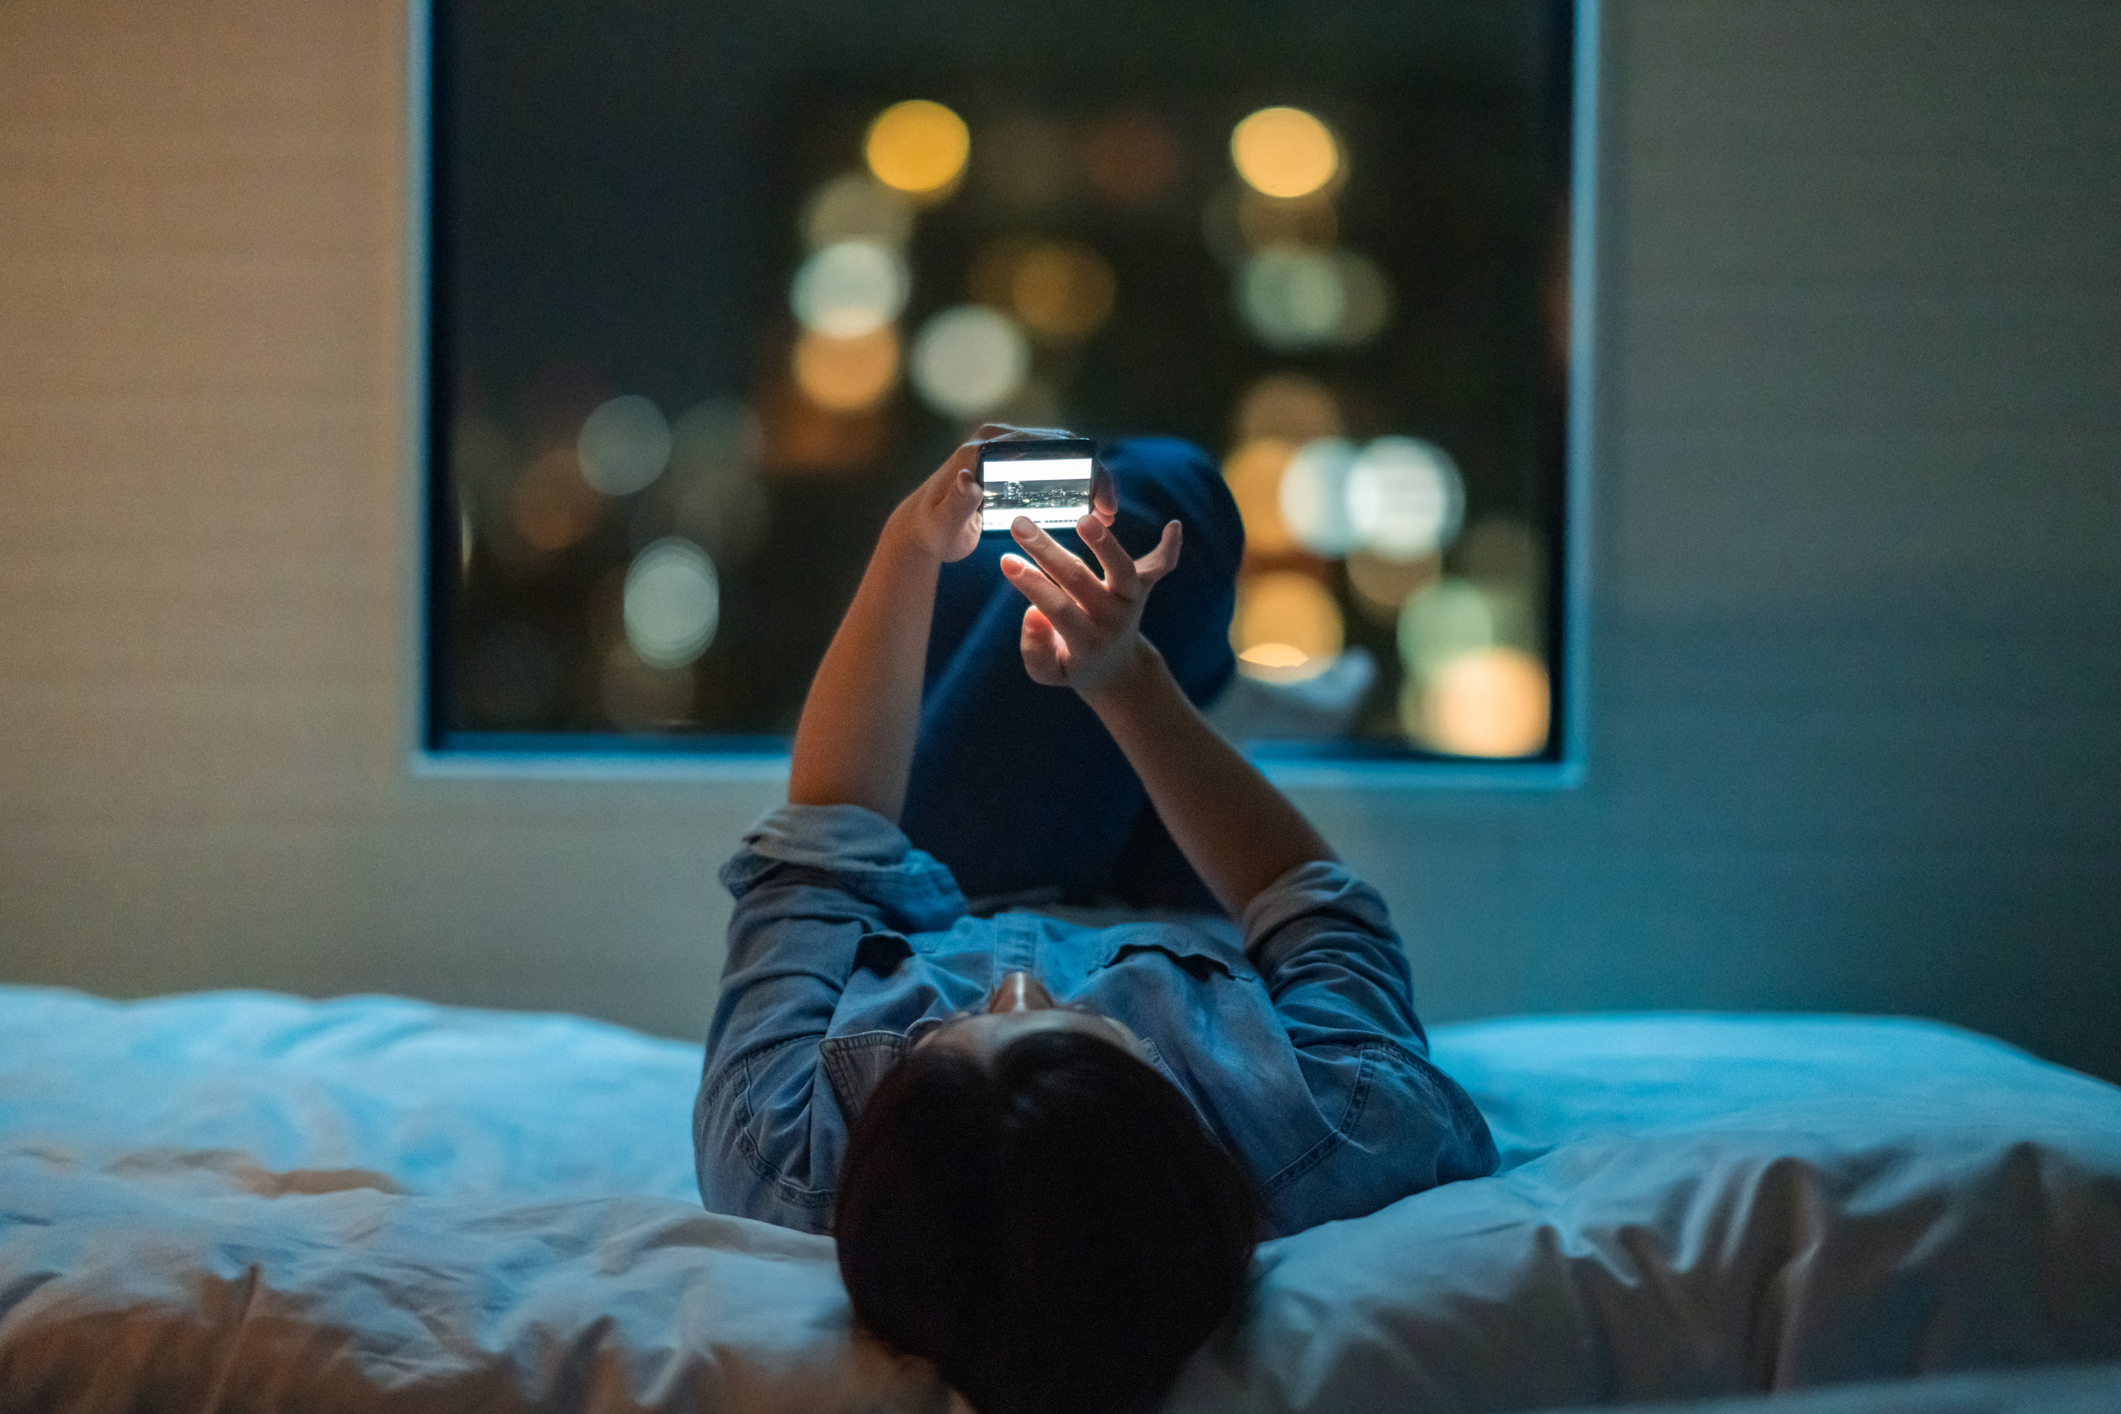 A woman (not Lim Ji-hye) lies on a bed looking at her phone. (Getty Images/iStock)